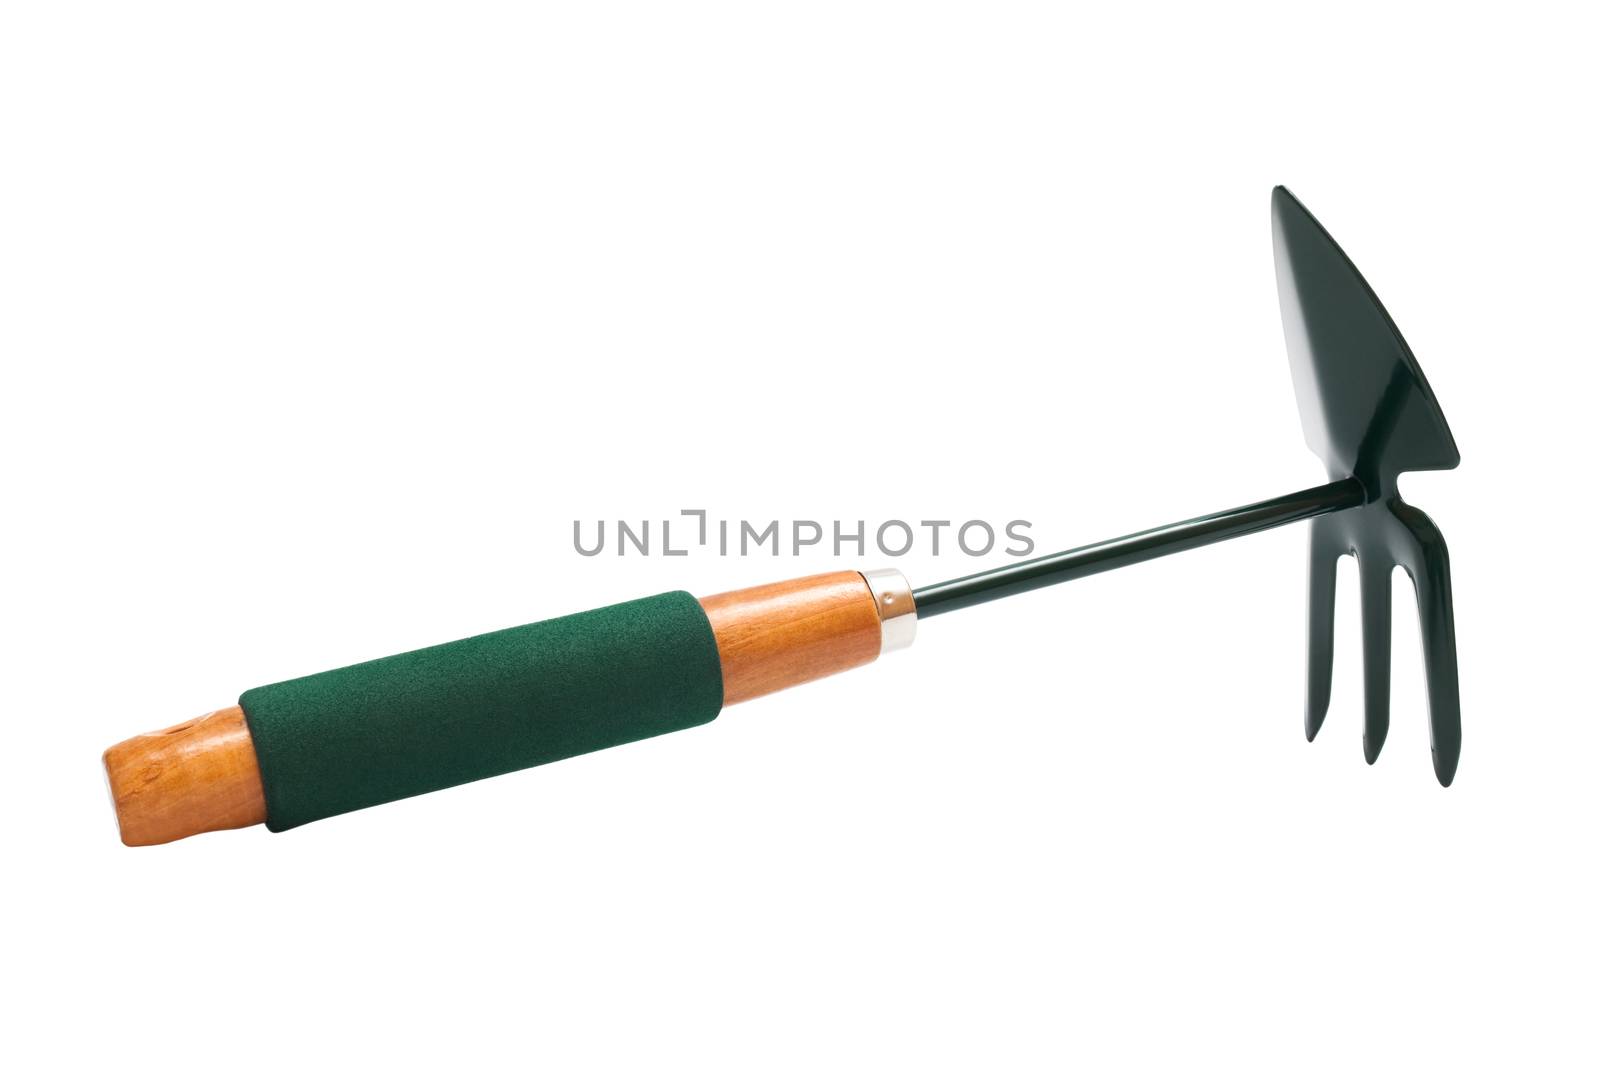 Green gardening hoe on a white background